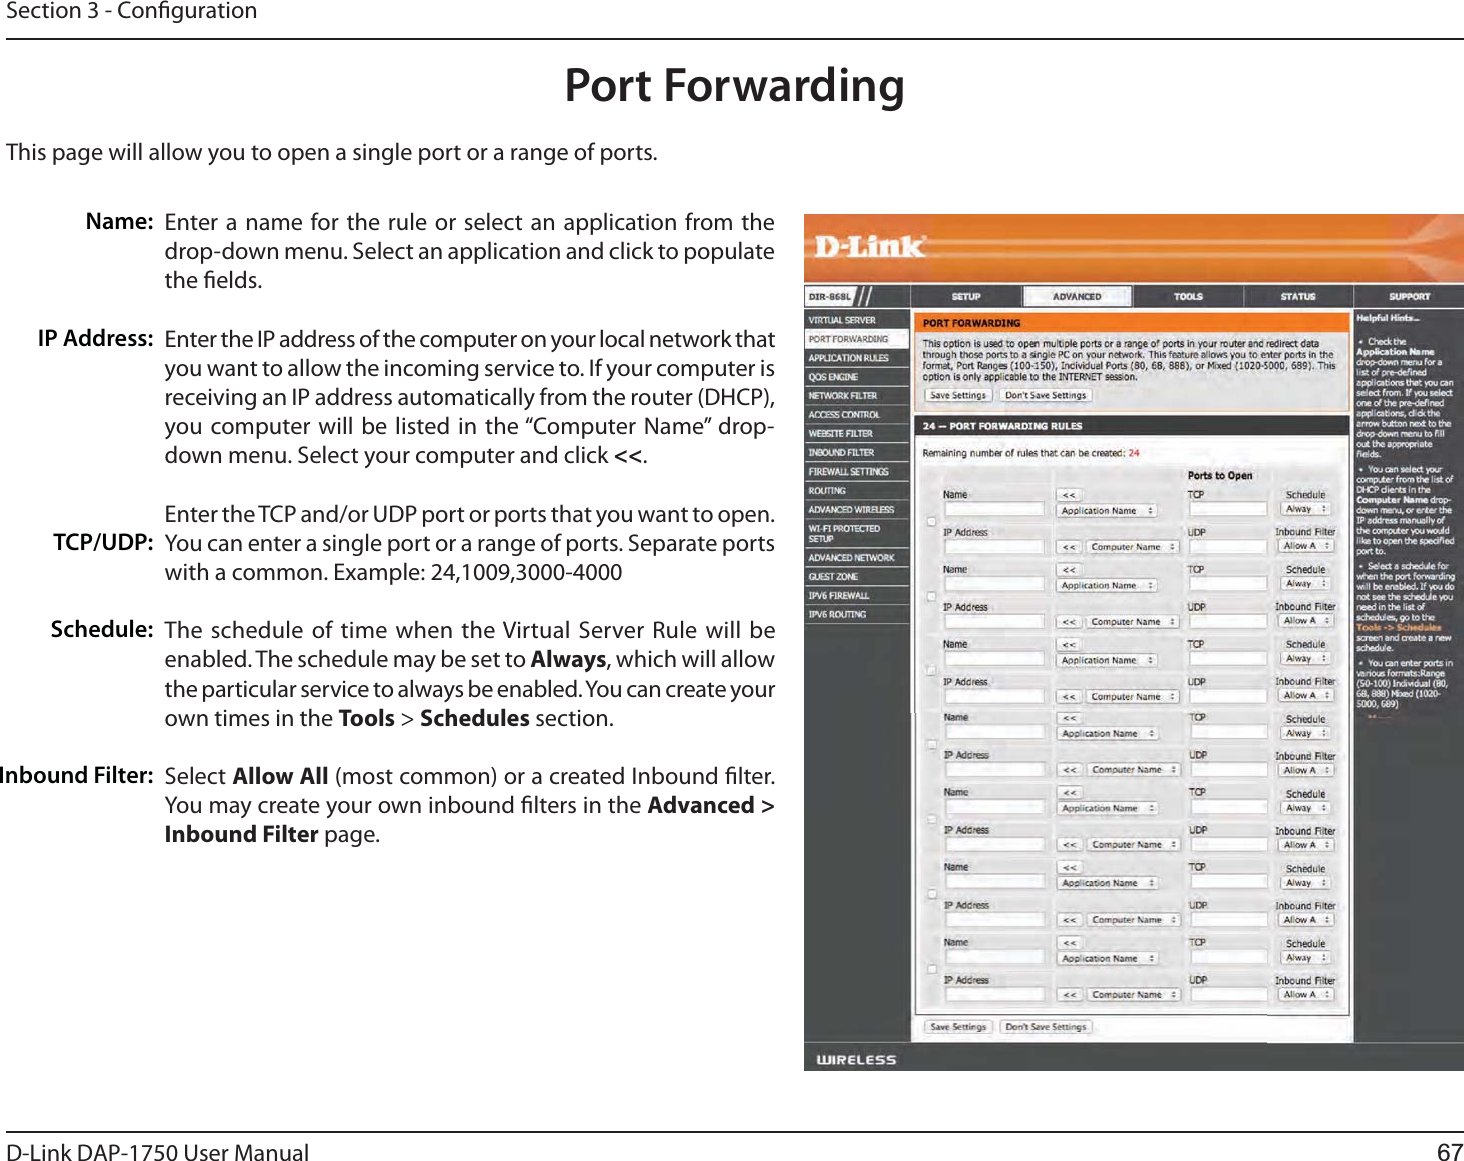 D-Link %&quot;1 User ManualSection 3 - CongurationThis page will allow you to open a single port or a range of ports.Port ForwardingEnter a name for the rule or select an application from the drop-down menu. Select an application and click to populate the elds.Enter the IP address of the computer on your local network that you want to allow the incoming service to. If your computer is receiving an IP address automatically from the router (DHCP), you computer will be listed in the “Computer Name” drop-down menu. Select your computer and click &lt;&lt;. Enter the TCP and/or UDP port or ports that you want to open. You can enter a single port or a range of ports. Separate ports with a common. Example: 24,1009,3000-4000The schedule of time when the Virtual Server Rule will be enabled. The schedule may be set to Always, which will allow the particular service to always be enabled. You can create your own times in the Tools &gt; Schedules section.Select Allow All (most common) or a created Inbound lter. You may create your own inbound lters in the Advanced &gt; Inbound Filter page.Name:IP Address:TCP/UDP:Schedule:Inbound Filter:67